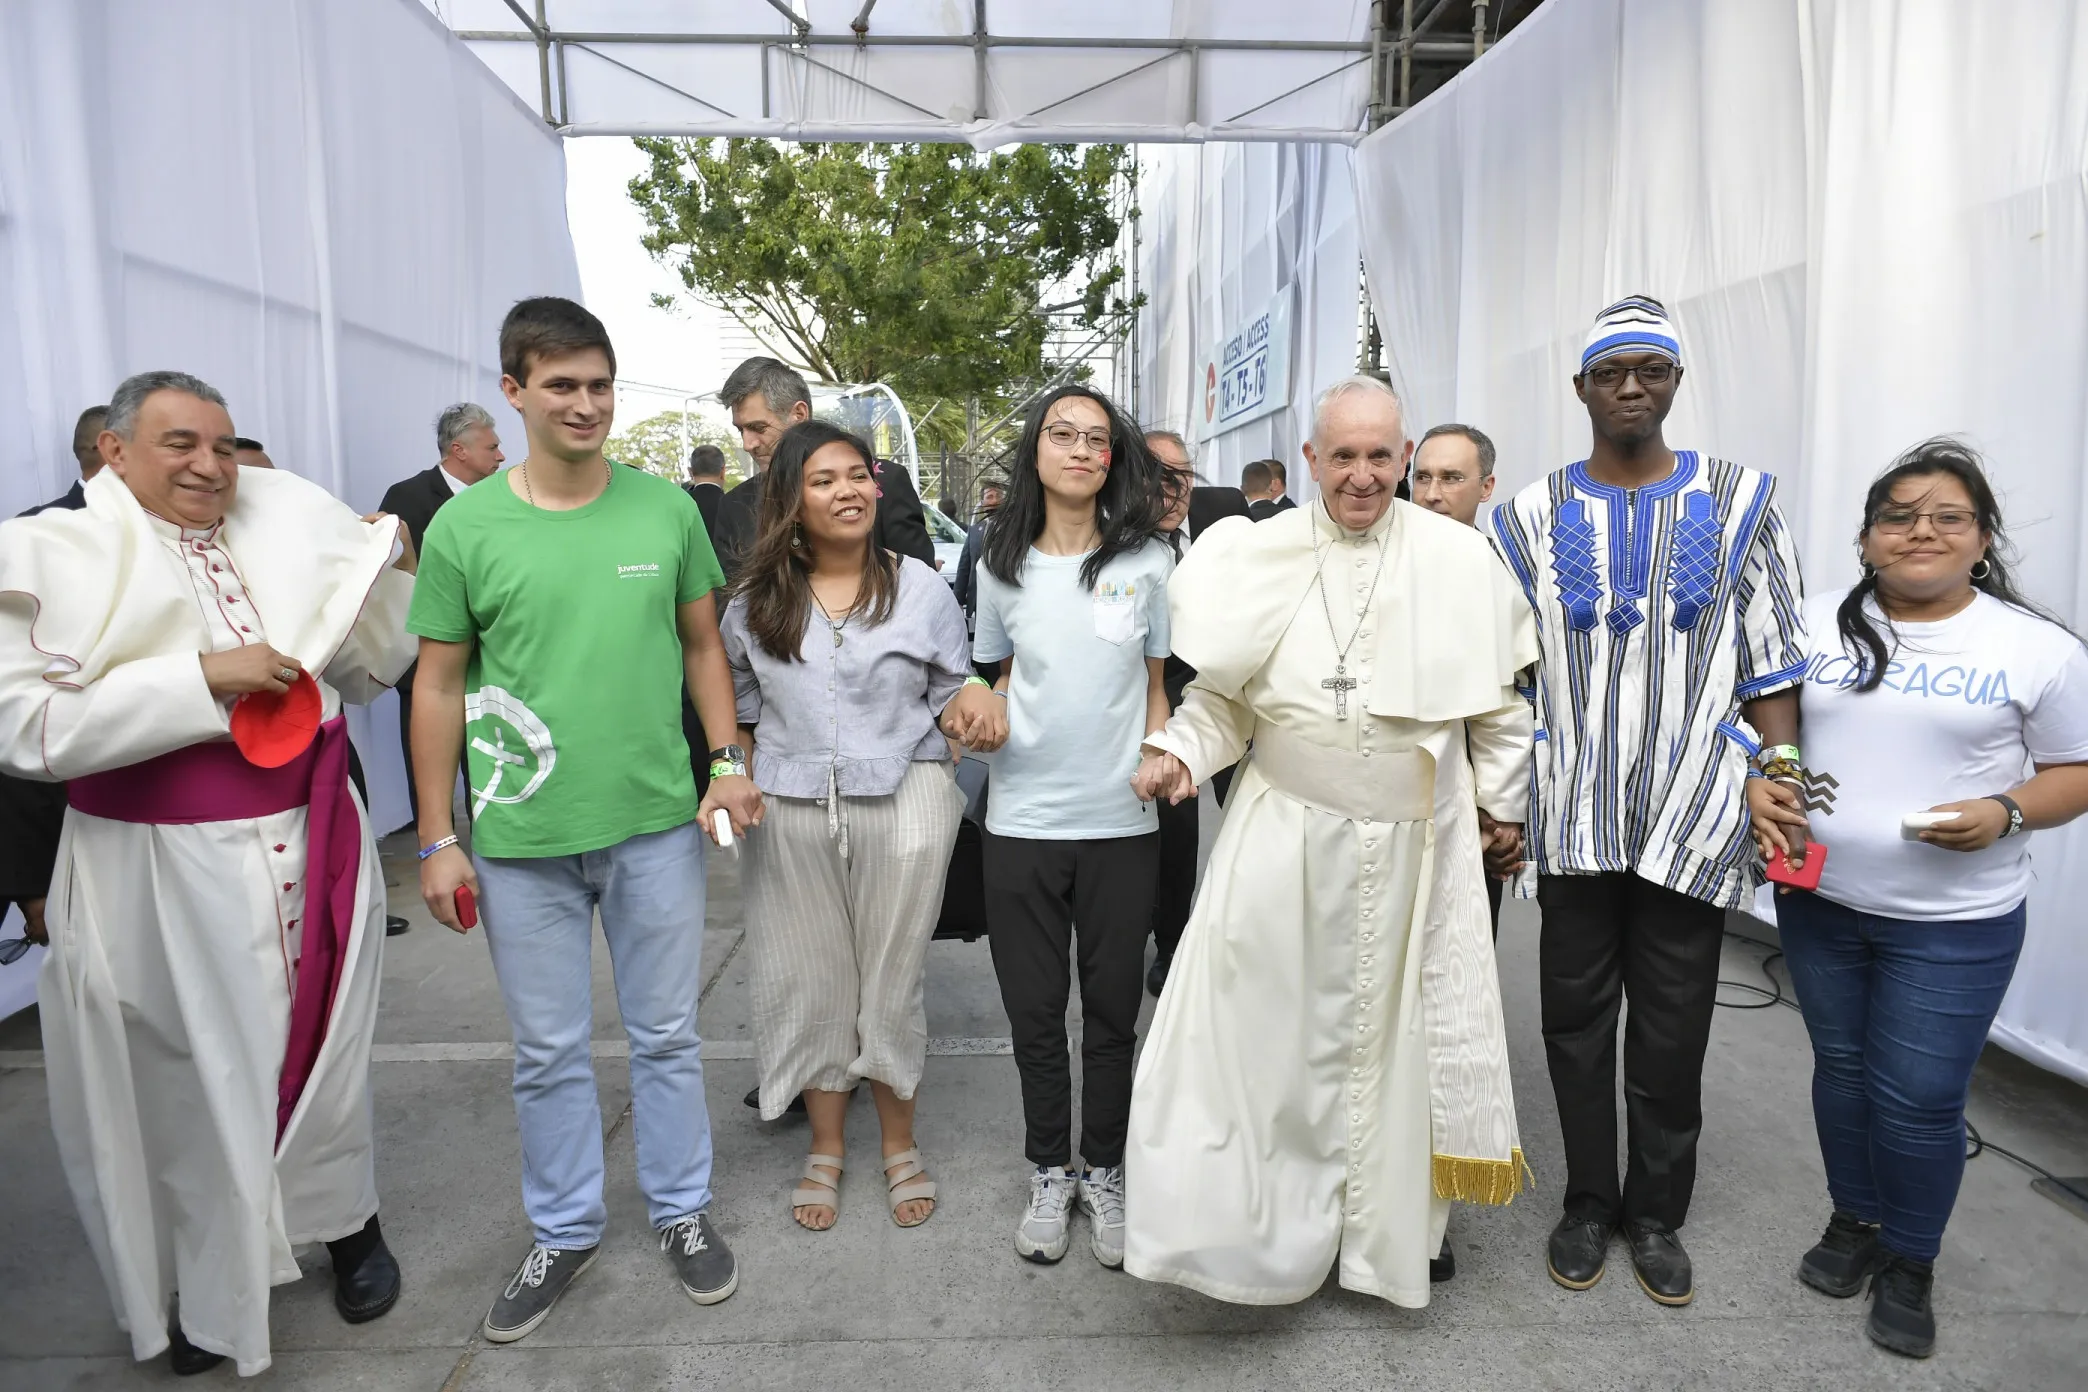 Pope Francis with teens at the opening ceremony of World Youth Day 2019 in Panama.?w=200&h=150